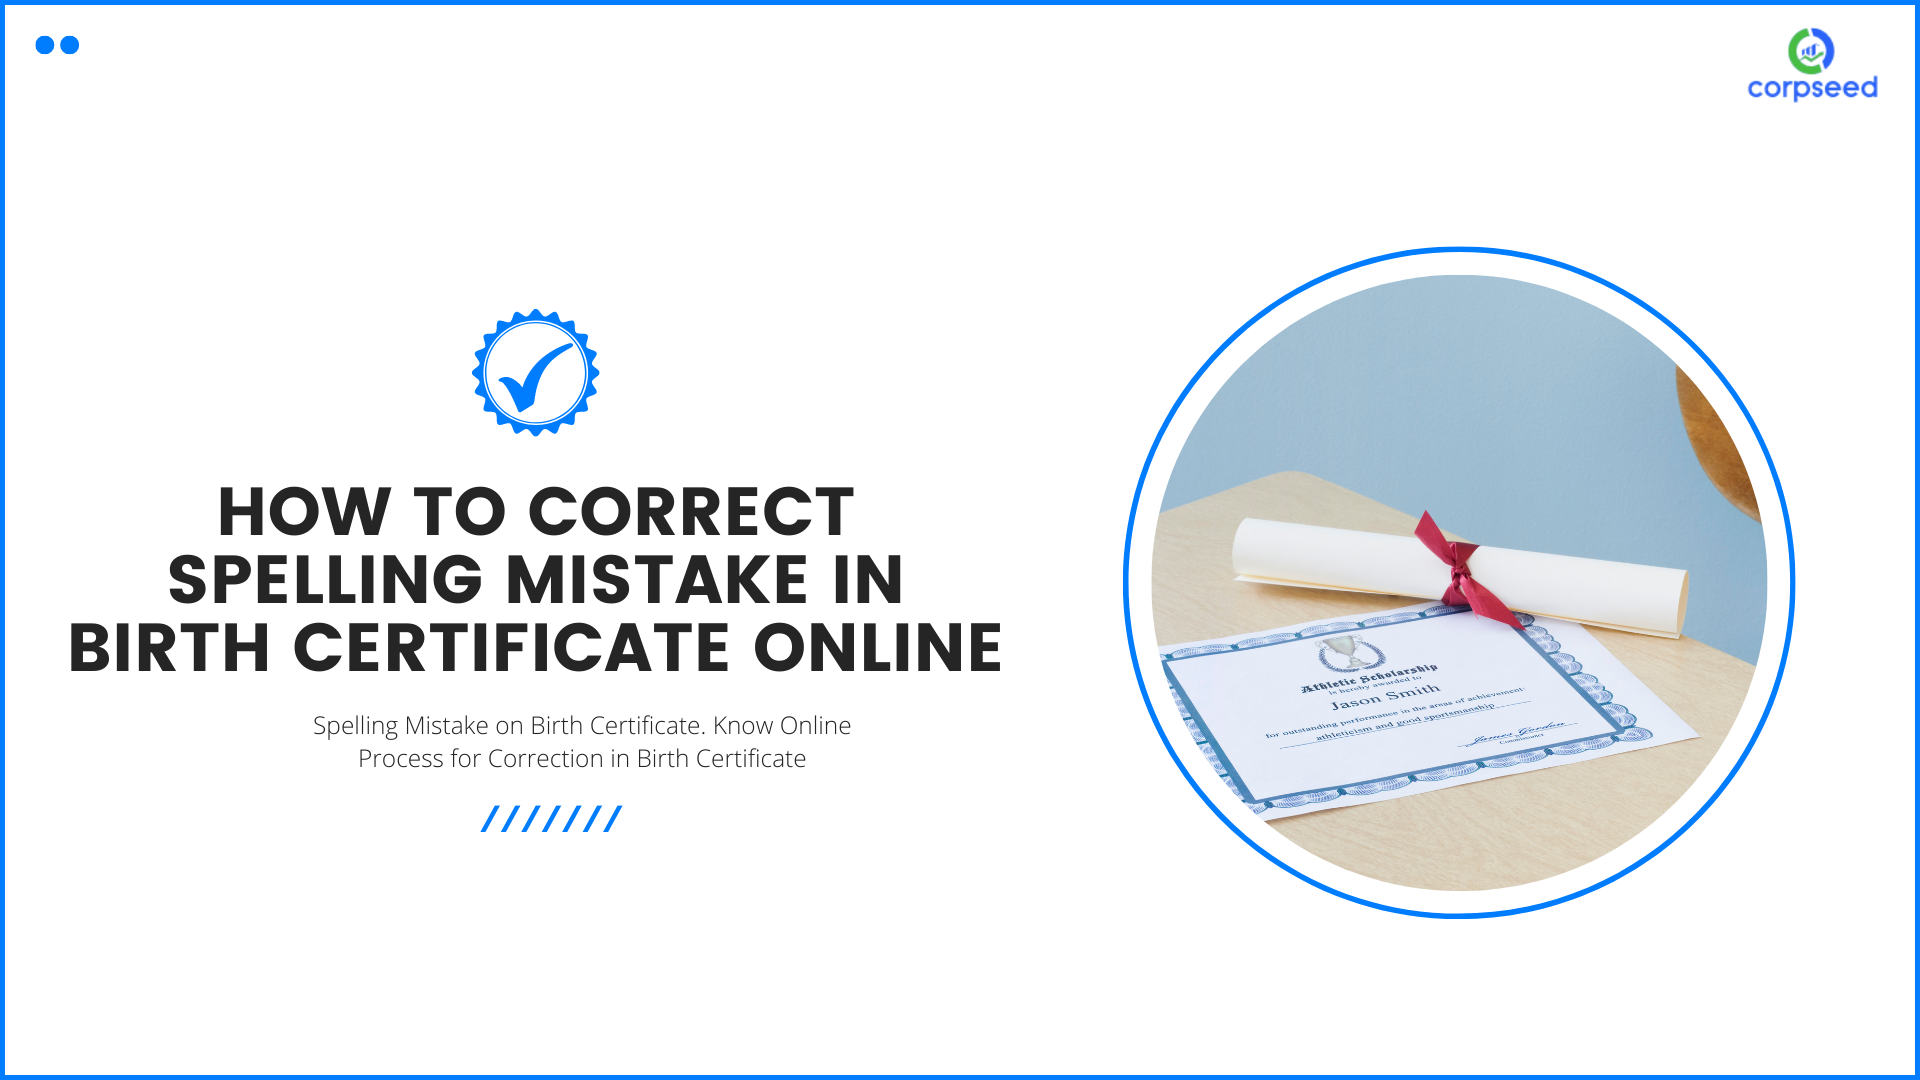 how-to-correct-spelling-mistake-in-birth-certificate-online-corpseed.png